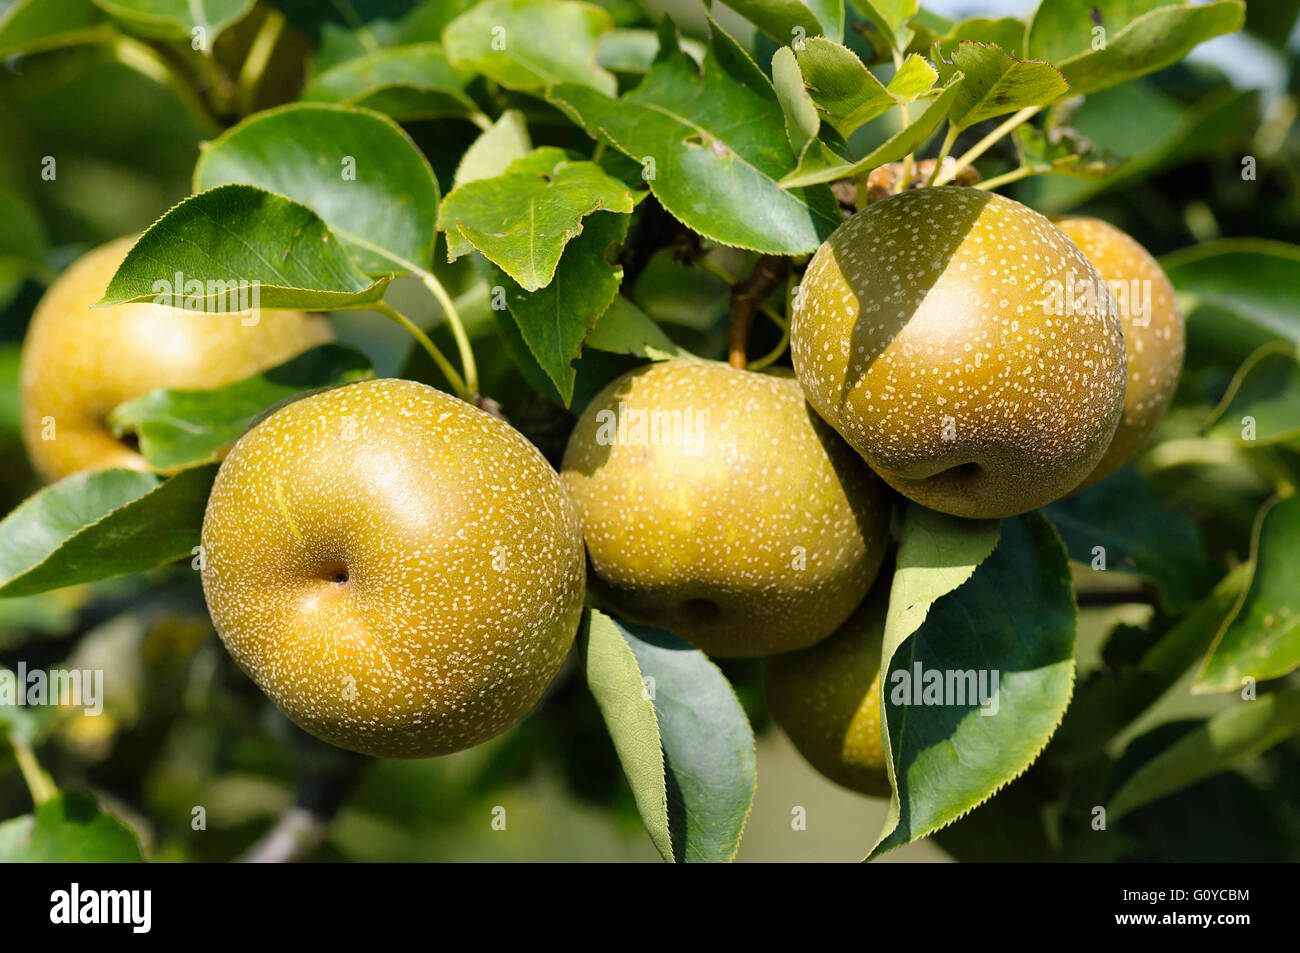 Pear, Nashi pear, Pyrus, Pyrus pyrifolia, Apple Pear, Asian Nashi Pear, Beauty in Nature, China indigenous, Colour, Crops, Deciduous, Edible, Spring Flowering, Food & Drink, Food and Drink, Fresh, Frost hardy, Fruit, Summer Fruiting, Growing, Japan indigenous, Japanese Pear, Korea insigenous, Korean Pear, Nature, Outdoor, Plant, Sand Pear, Taiwan Pear, Tree, Wild flower, Brown, Green, Stock Photo